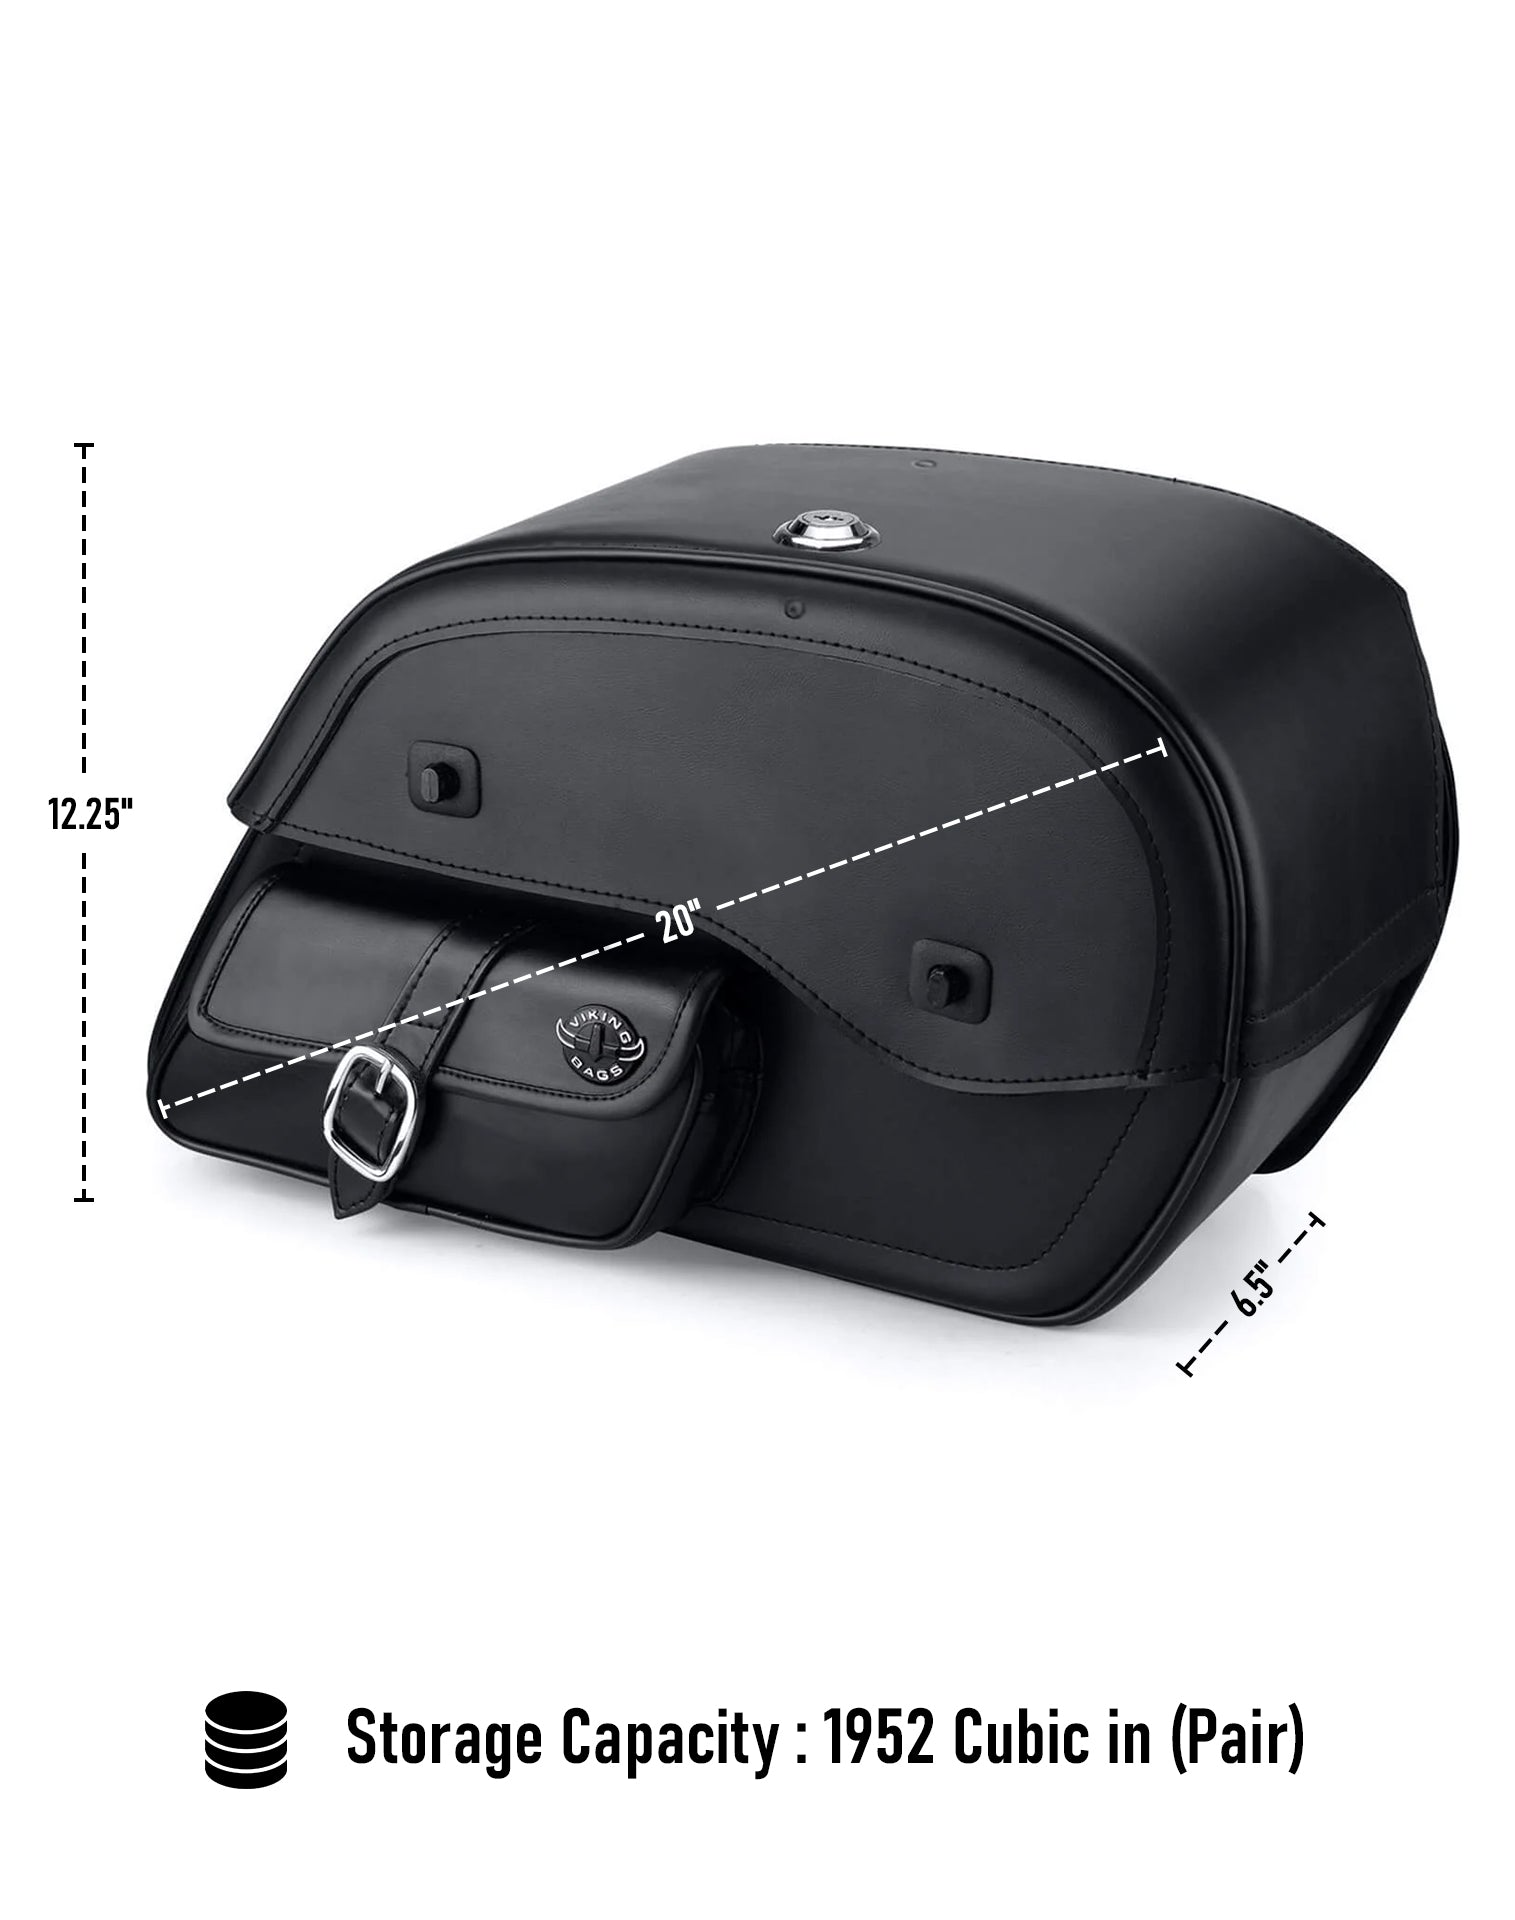 Viking Essential Side Pocket Large Suzuki Boulevard C90 Vl1500 Leather Motorcycle Saddlebags Can Store Your Ridings Gears